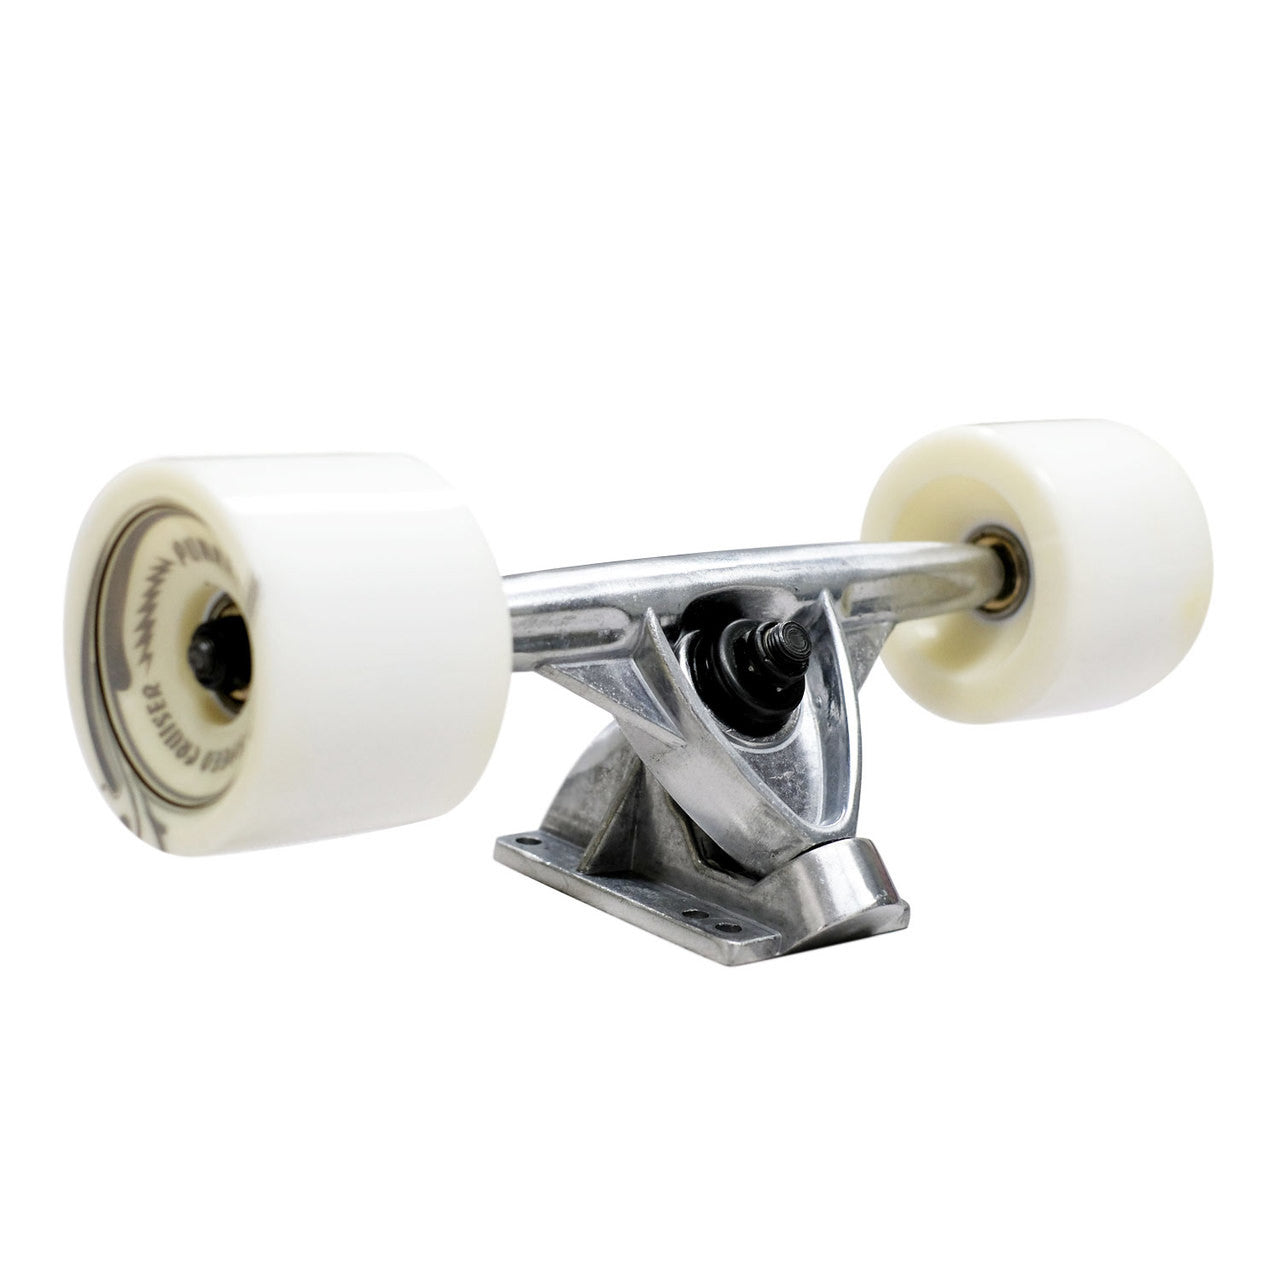 Yocaher Kicktail Longboard Complete - Crest Onyx